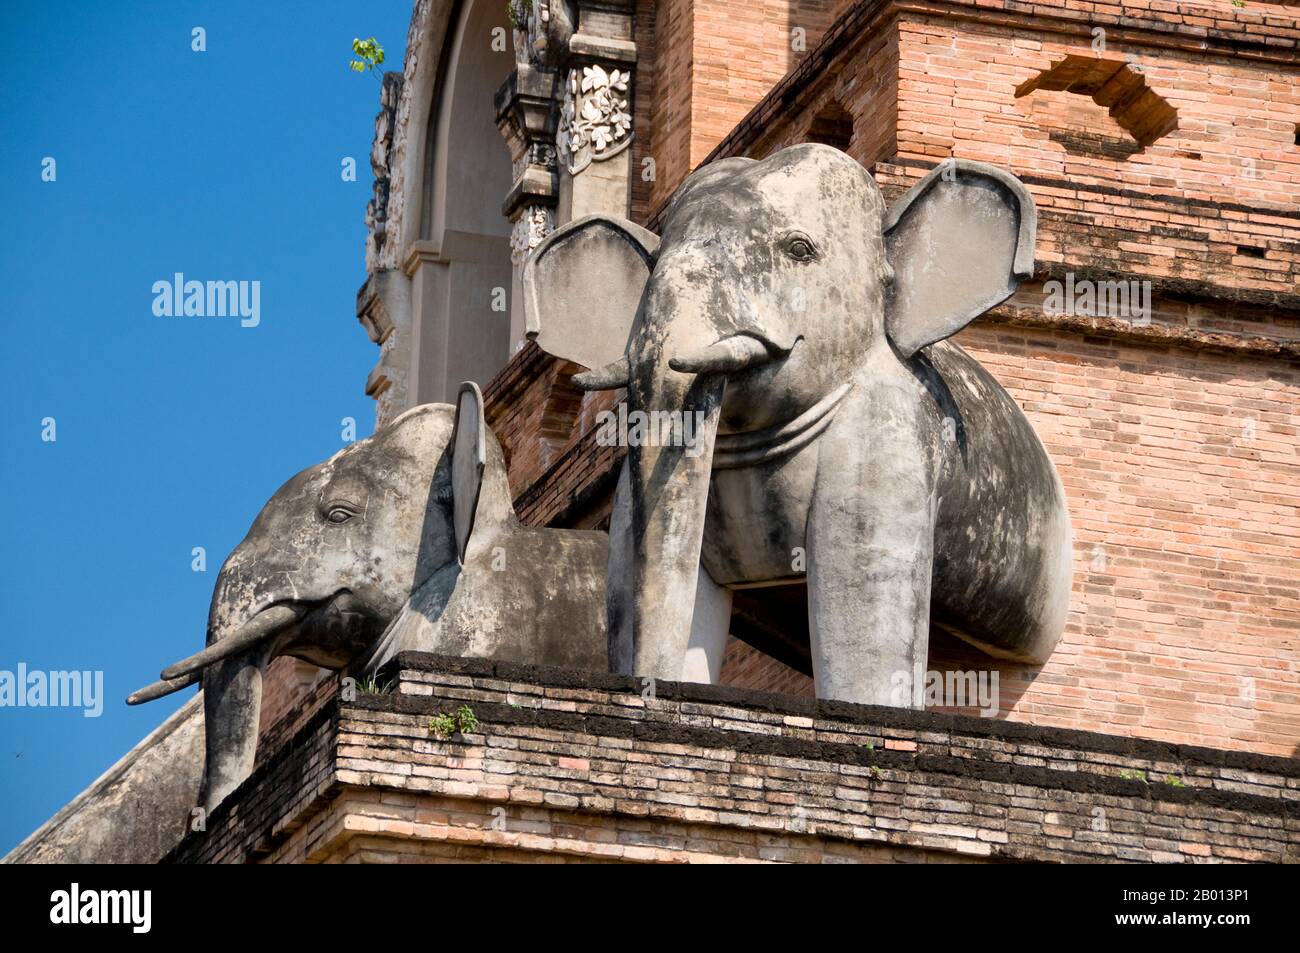 Thailand: Elephants adorning the main chedi, Wat Chedi Luang, Chiang Mai.  Wat Chedi Luang translates literally from the Thai as ‘Monastery of the Great Stupa’. Construction of the temple began at the end of the 14th century when the Lan Na Kingdom was in its prime. King Saen Muang Ma (1385-1401) intended it as the site of a great reliquary to enshrine the ashes of his father, King Ku Na (1355-85). Today it is the the site of the Lak Muang or City Pillar. The annual Inthakin ceremony occurs within the confines of the temple. Stock Photo